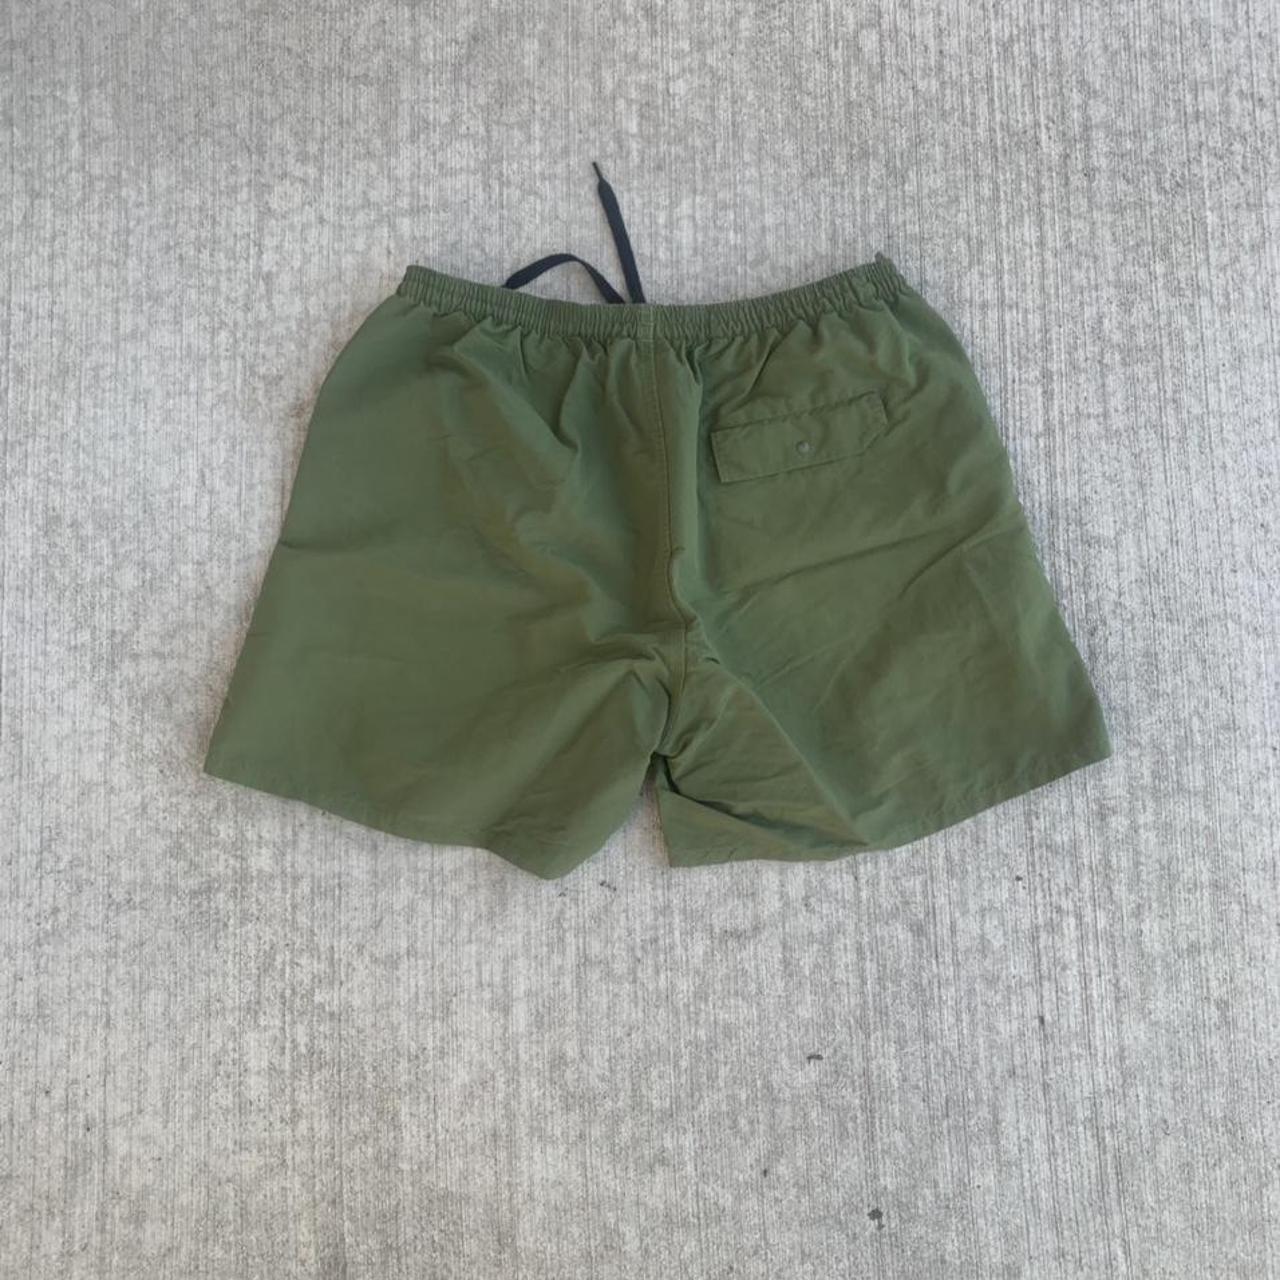 Cactus Jack Trail Run shorts in Army Green 💚 well... - Depop